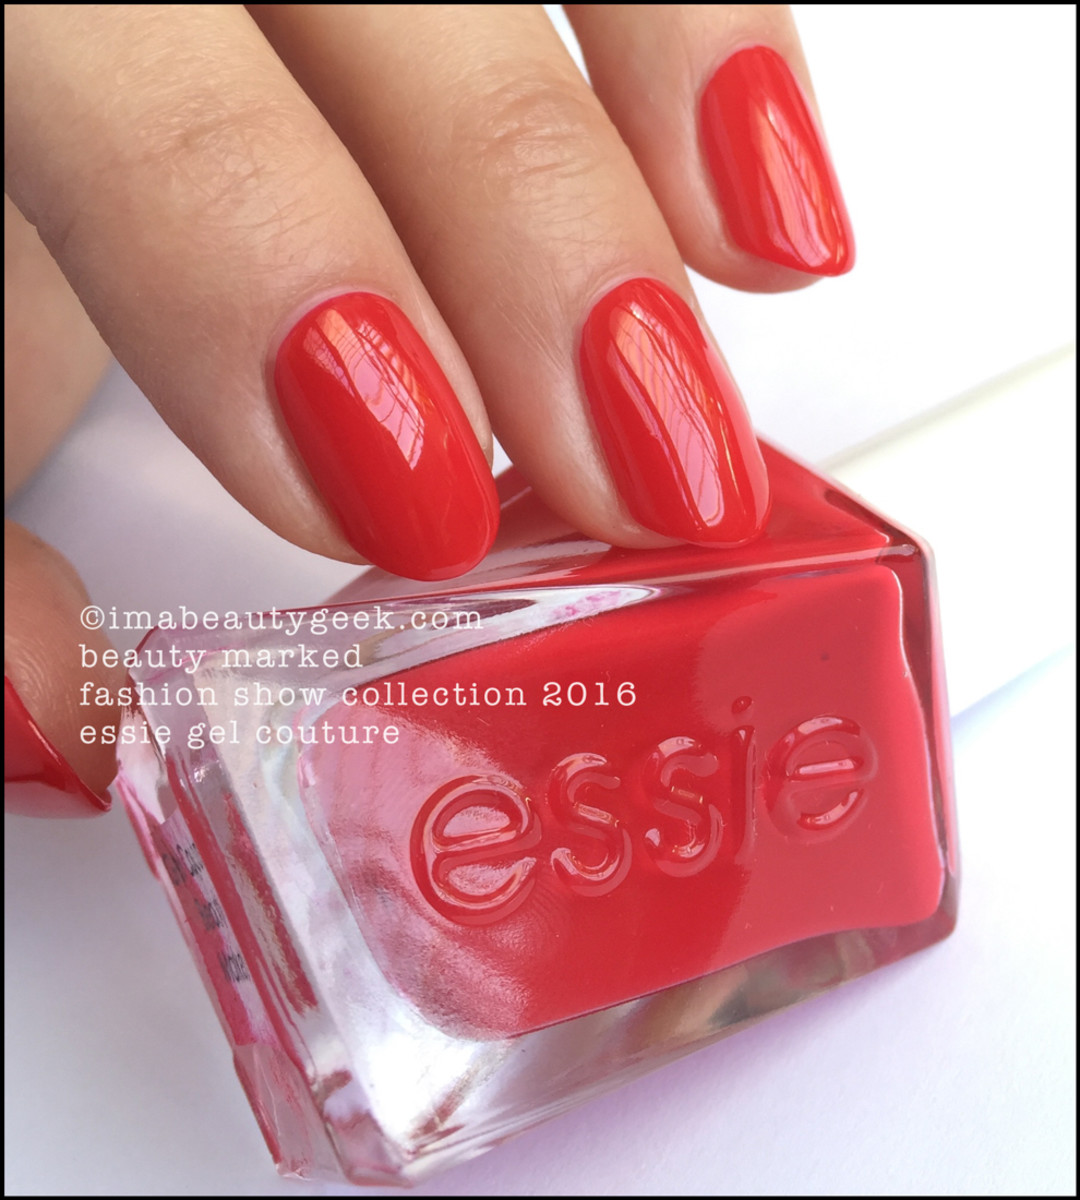 Essie Beauty Marked_Essie Gel Couture Swatches Review 2016